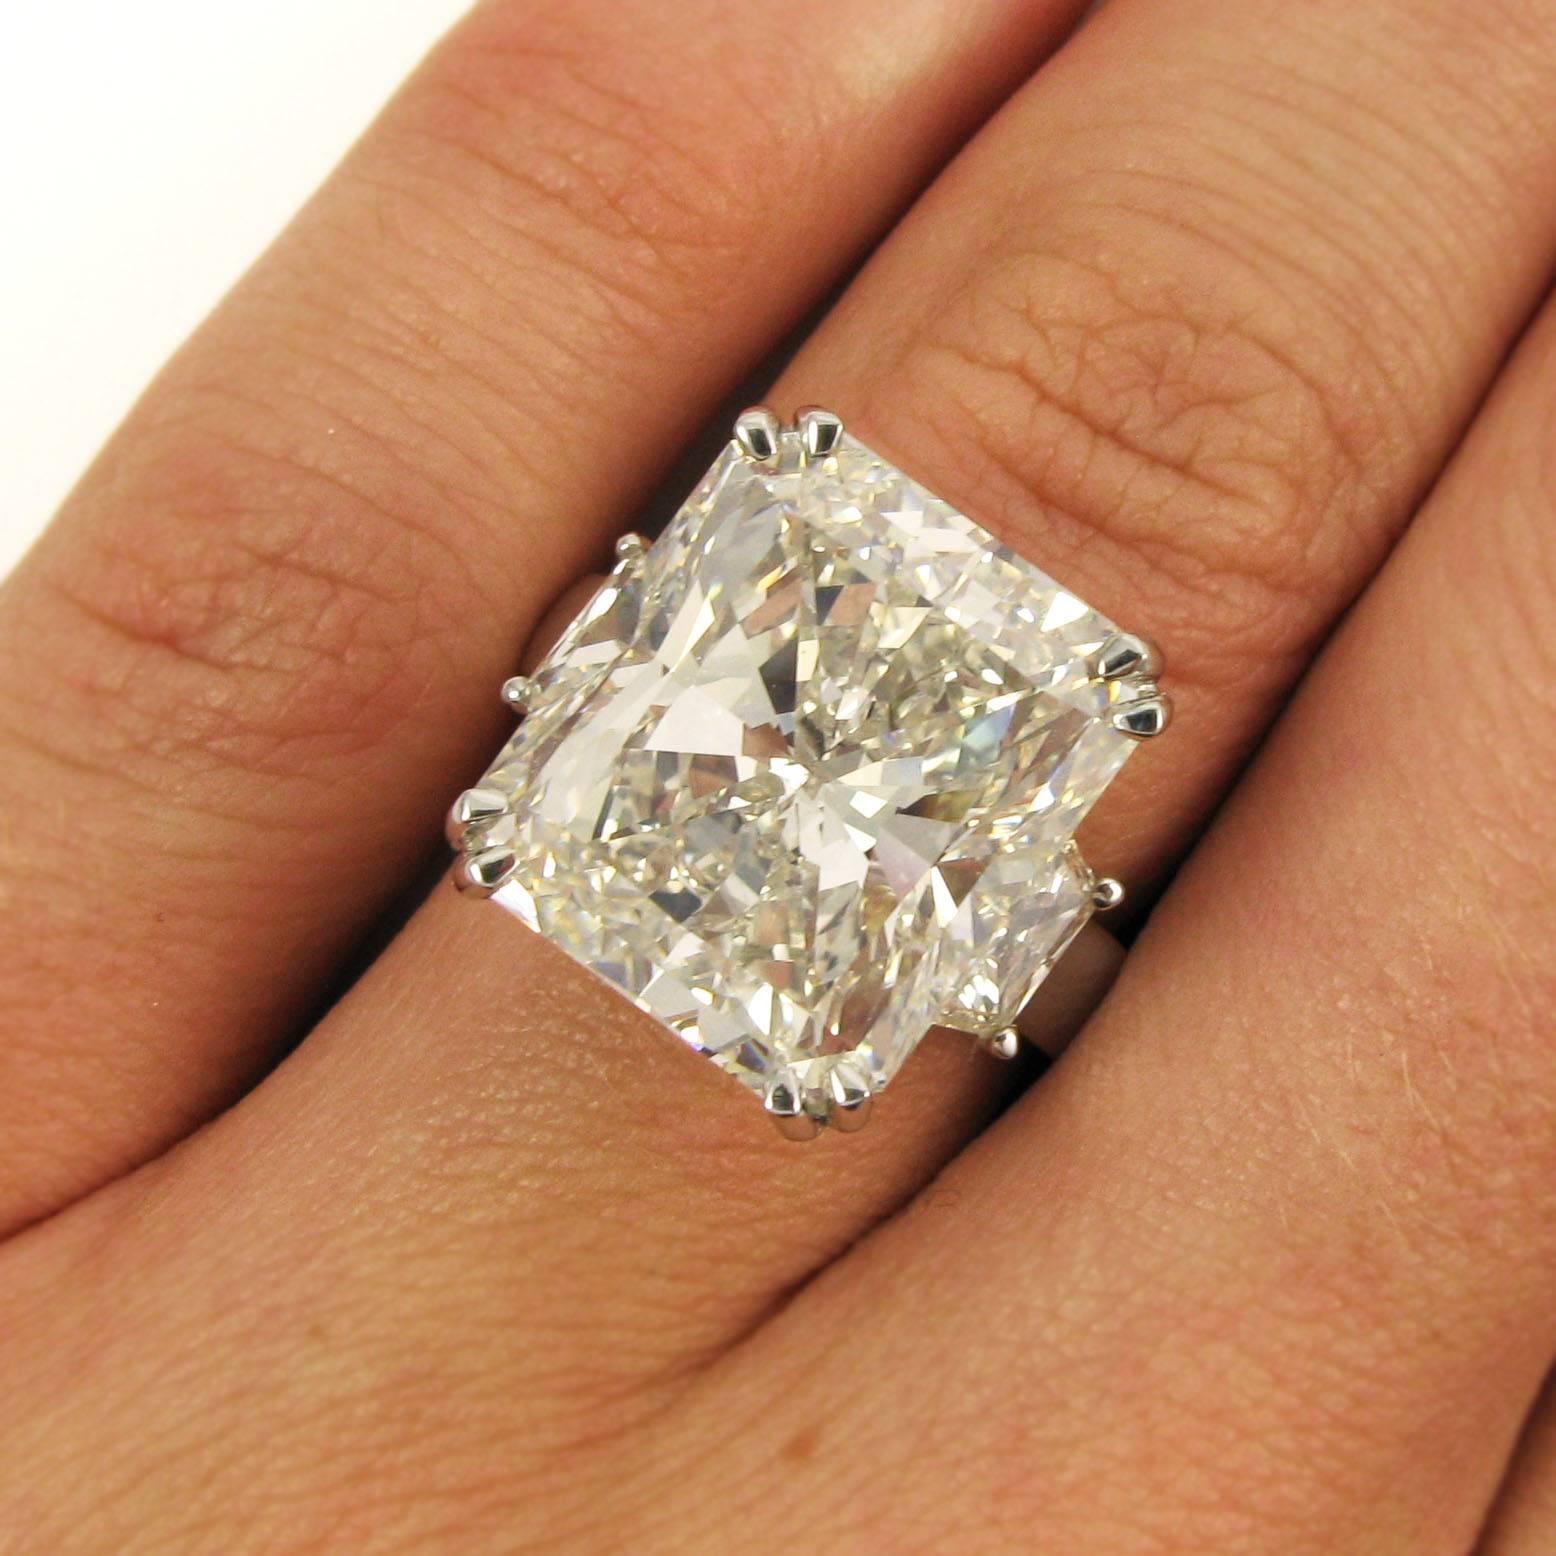 A rare and important find, this ring features an incredible 15.14 carat radiant-cut diamond with G color and VS1 clarity. The diamond is prong set and flanked by two trapezoid-cut diamonds totaling 0.93 carat. Mounted in platinum. 

Purchase